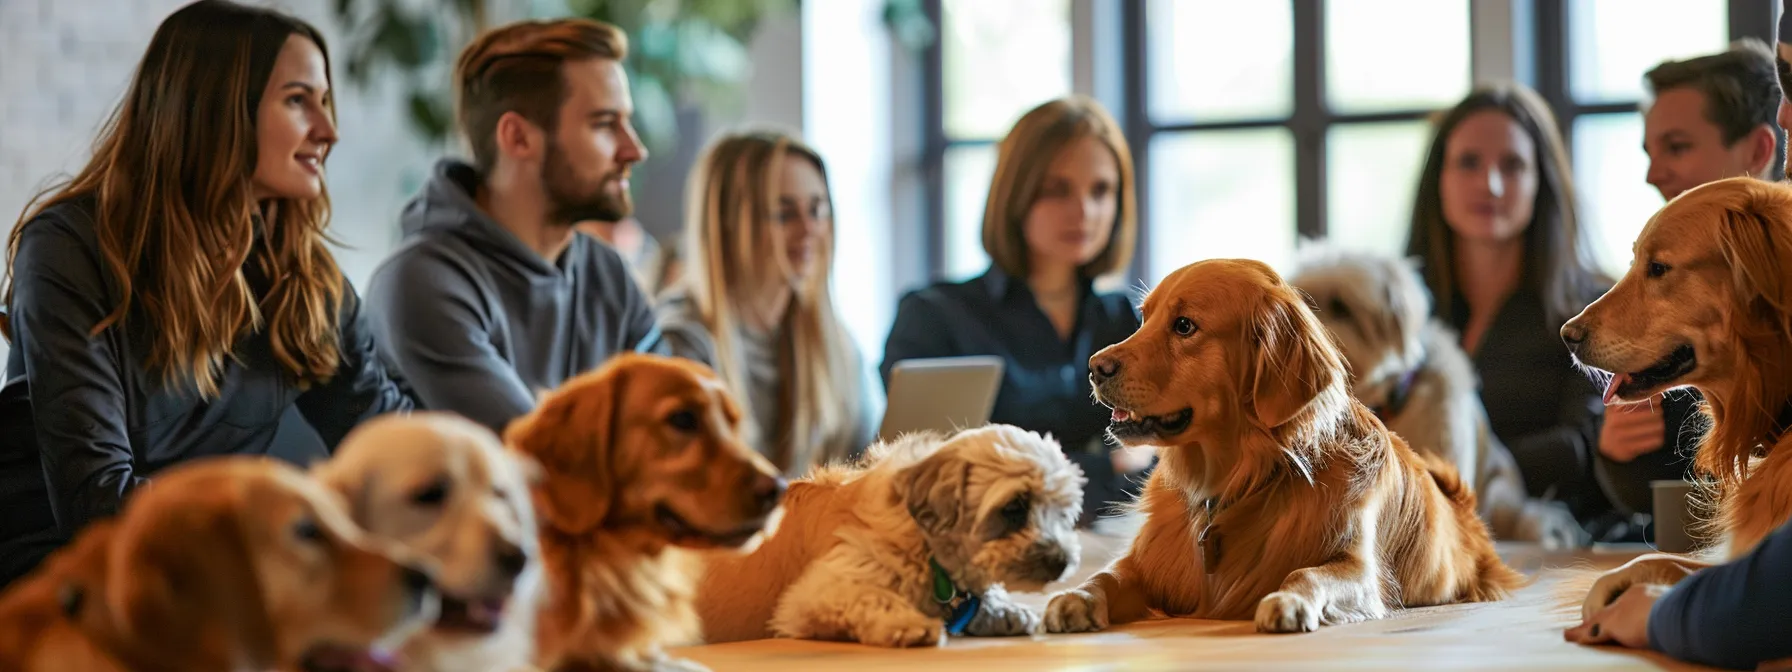 a group of dog trainers gathered around a table filled with guides and tutorials, discussing training techniques and sharing advice.